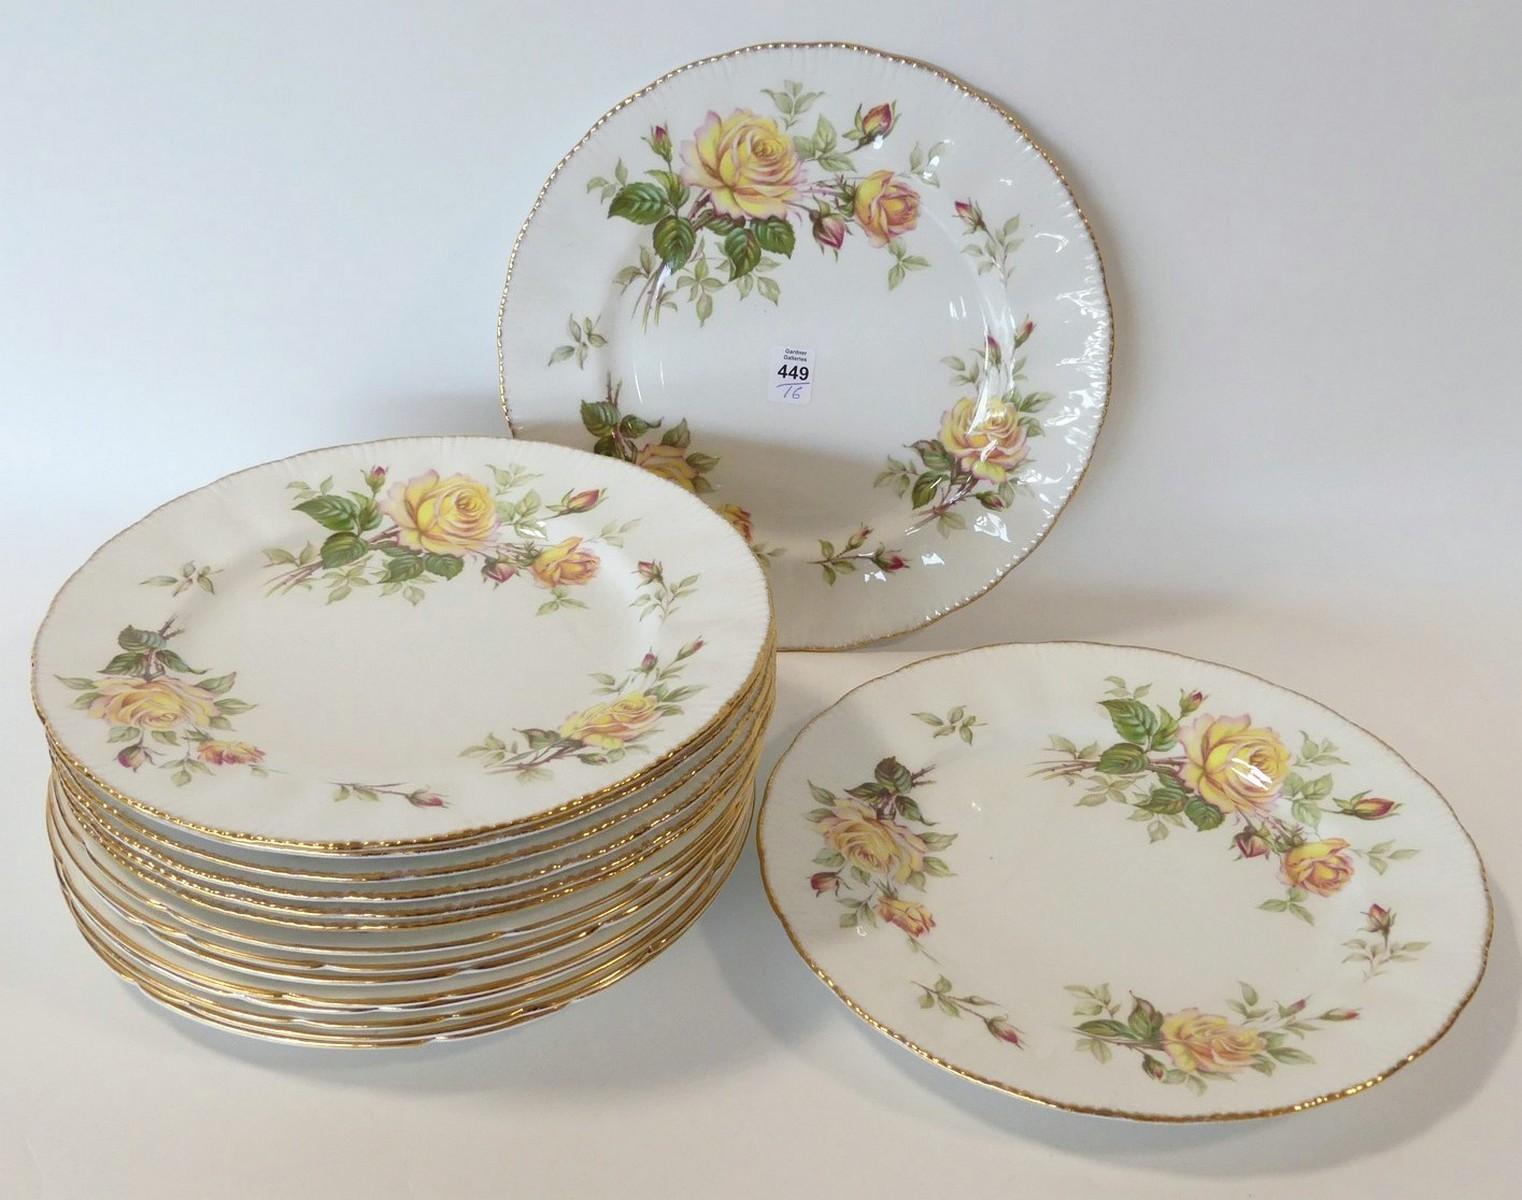 TWO SETS OF DINNER PLATES